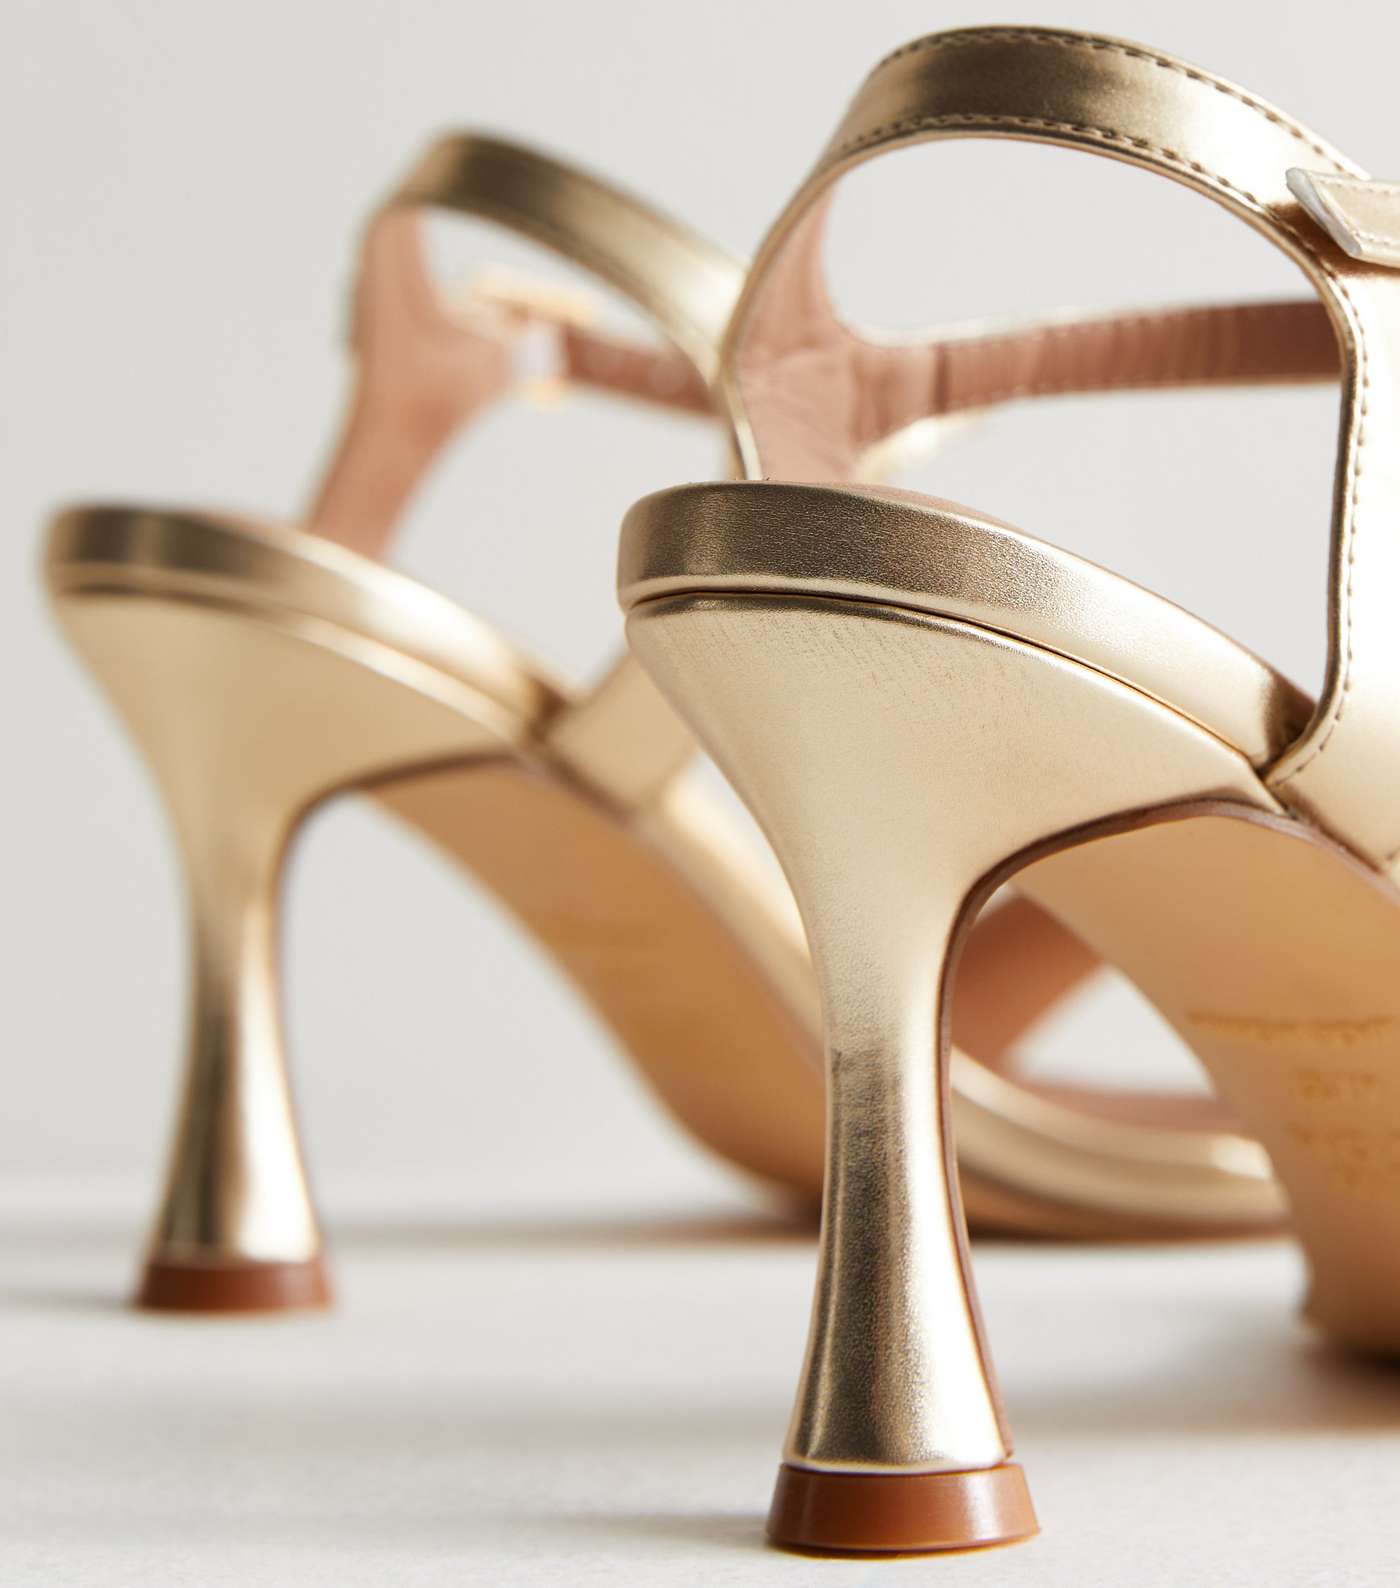 Gold Leather-Look 2 Part Stiletto Heel Sandals Image 5